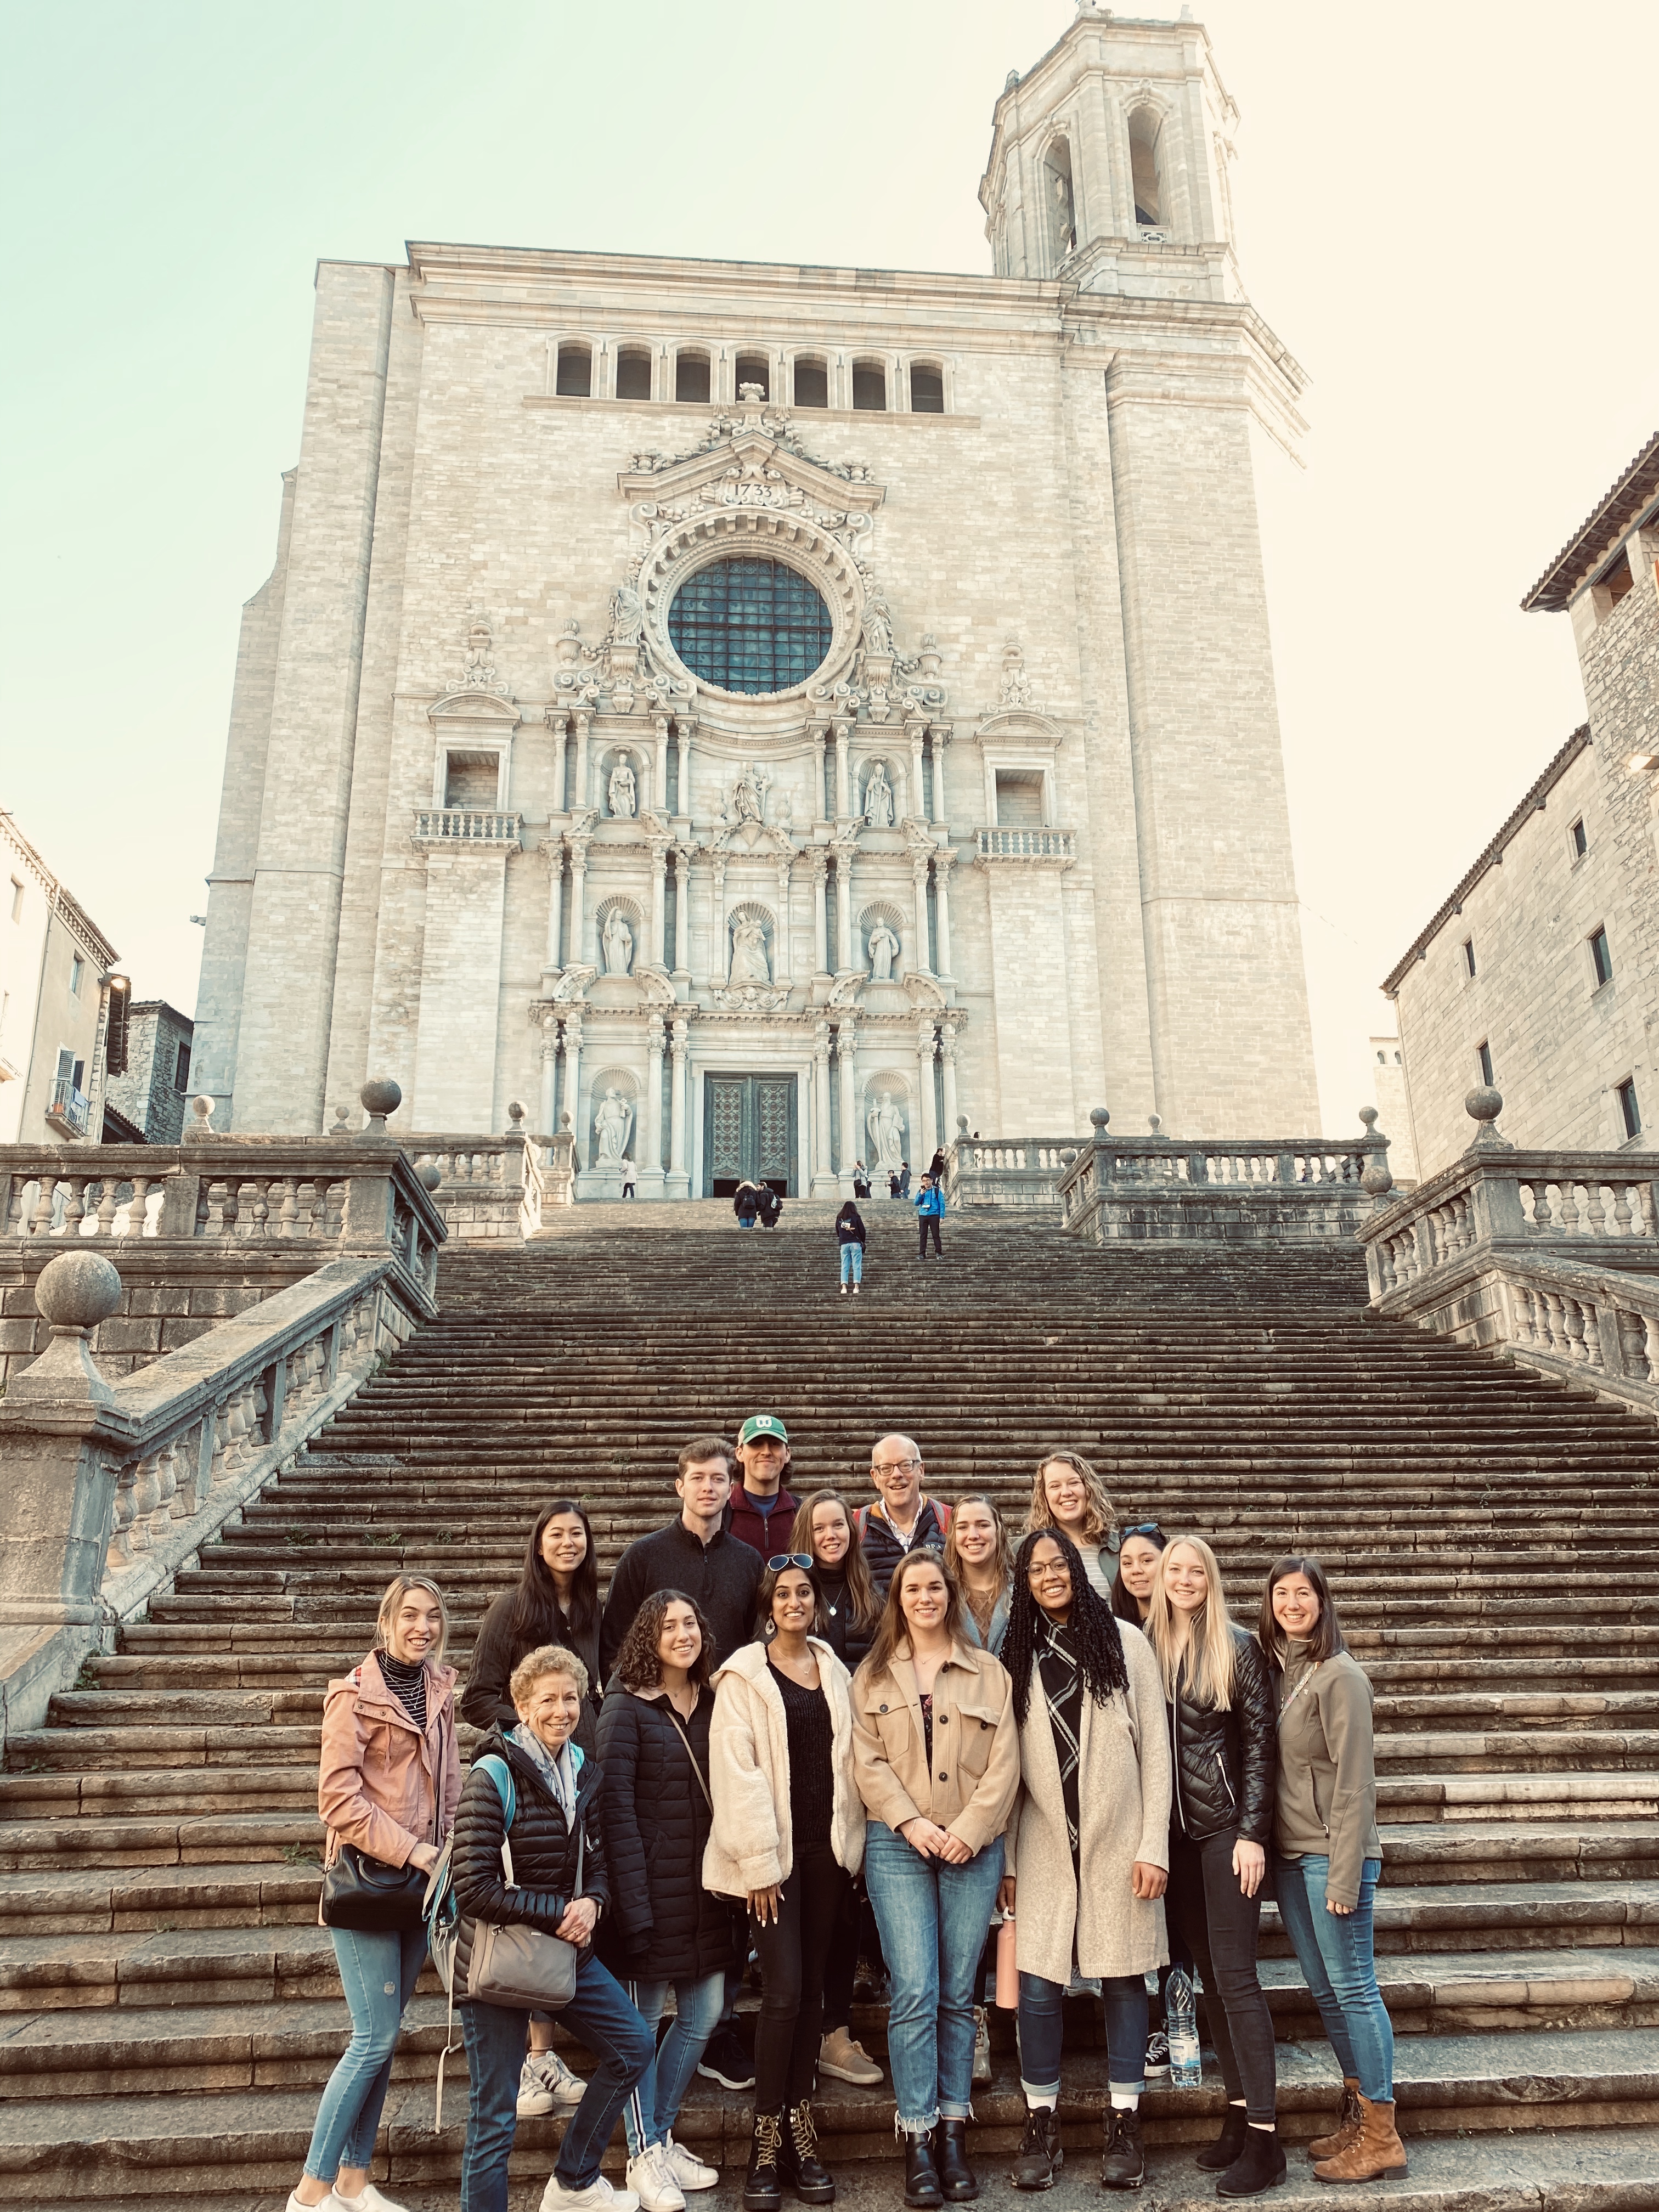 Illinois Wesleyan students on the Spain Program in Barcelona pose in front of the Girona Cathedral, also known as the Cathedral of St. Mary of Girona, in Girona, Catalonia, Spain.